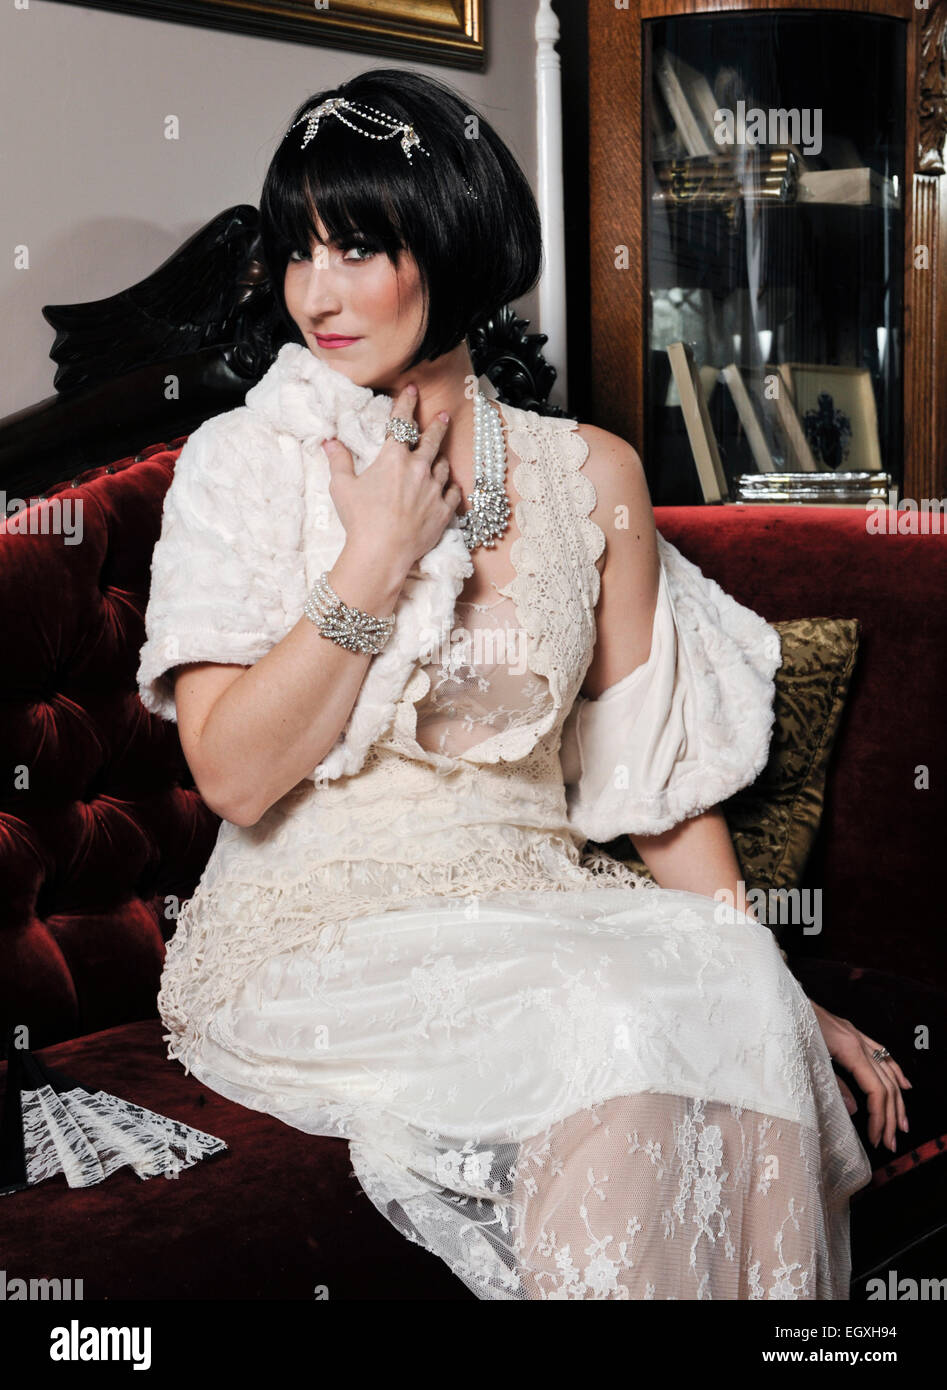 A portrait of a woman dressed in vintage style clothing (twenties thirties) Stock Photo